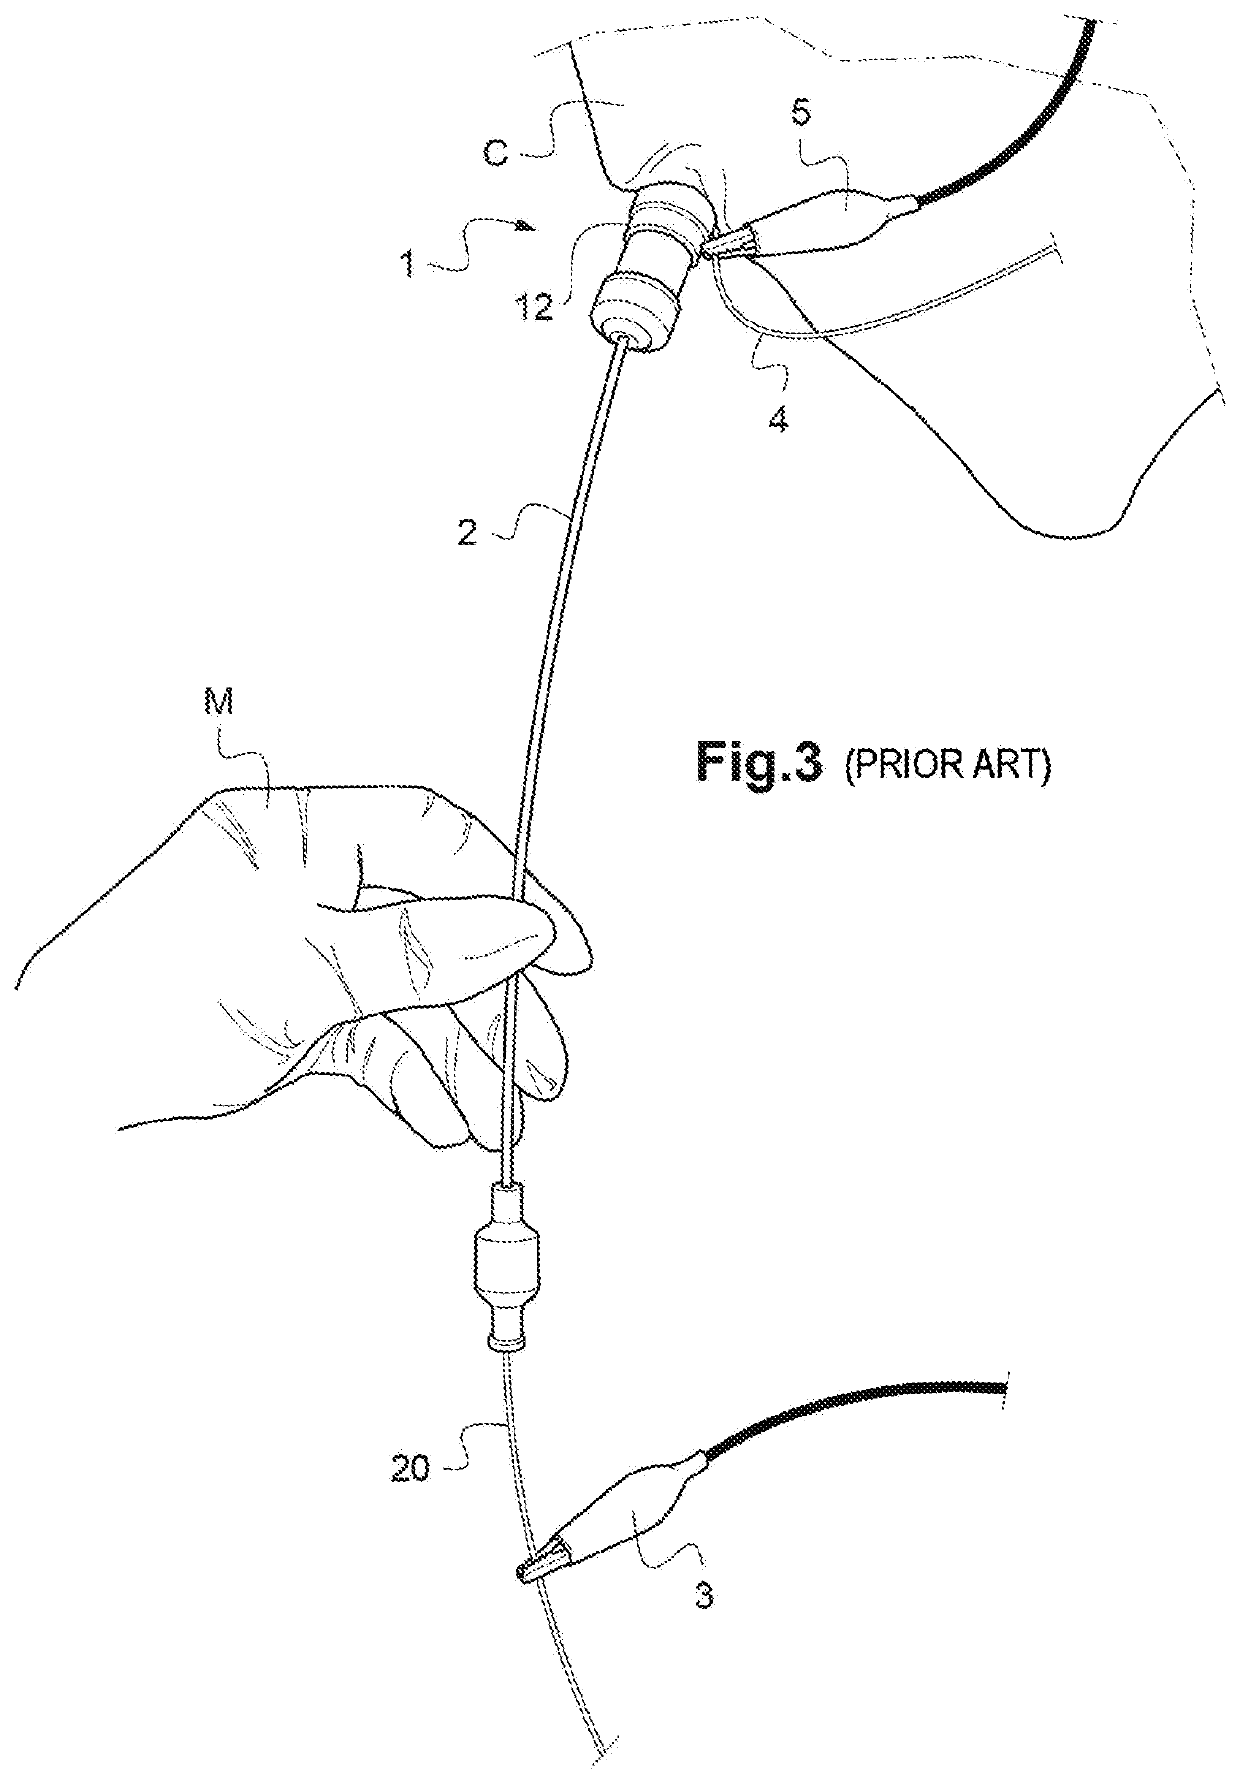 Assembly for placement of a cardiac, aortic or arterial implant with stimulation assistance by a peripheral venous or arterial catheter